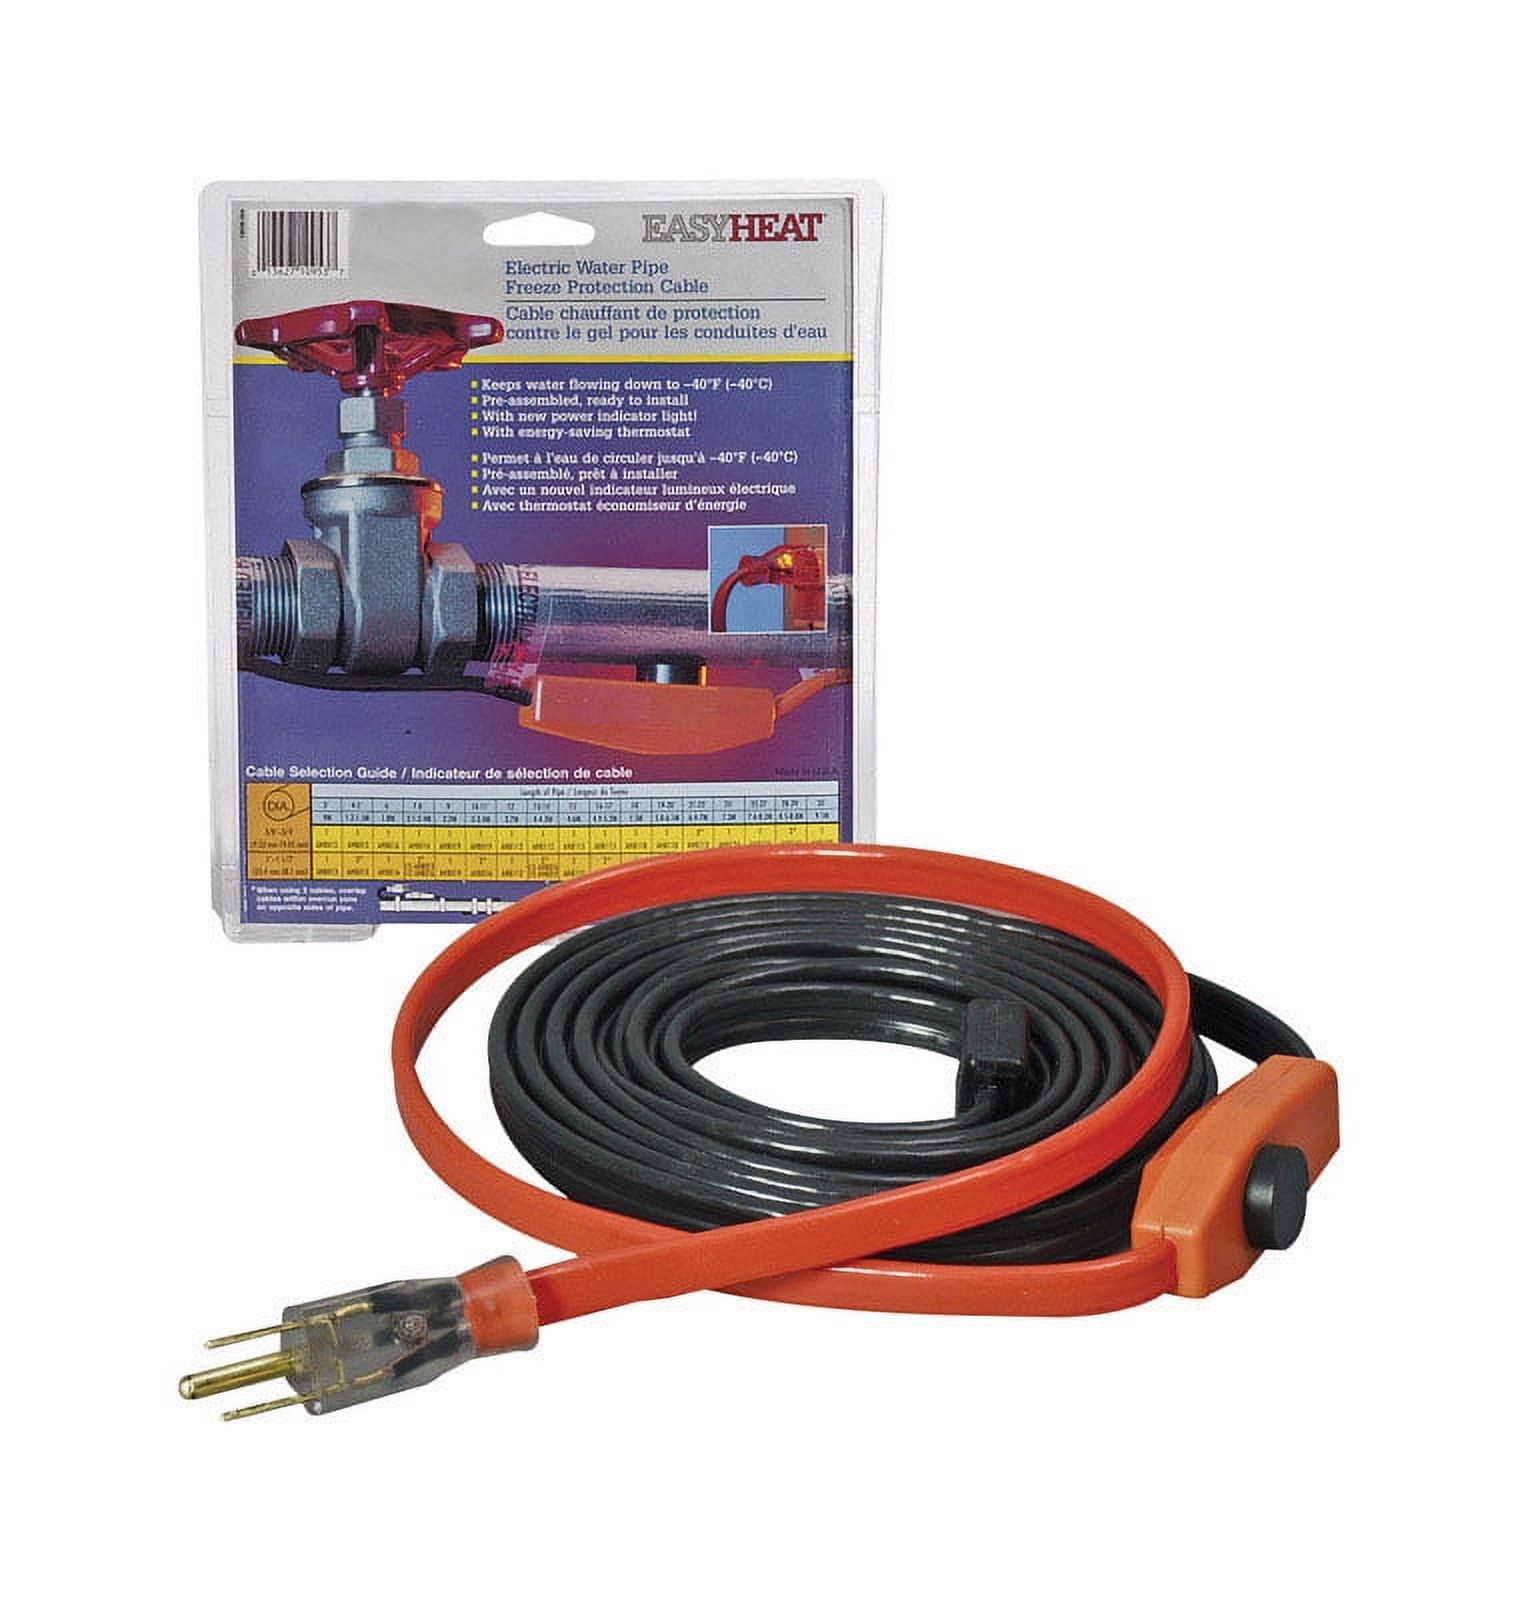 Easy Heat AHB016 Heating Cable For Water Pipe - image 1 of 6